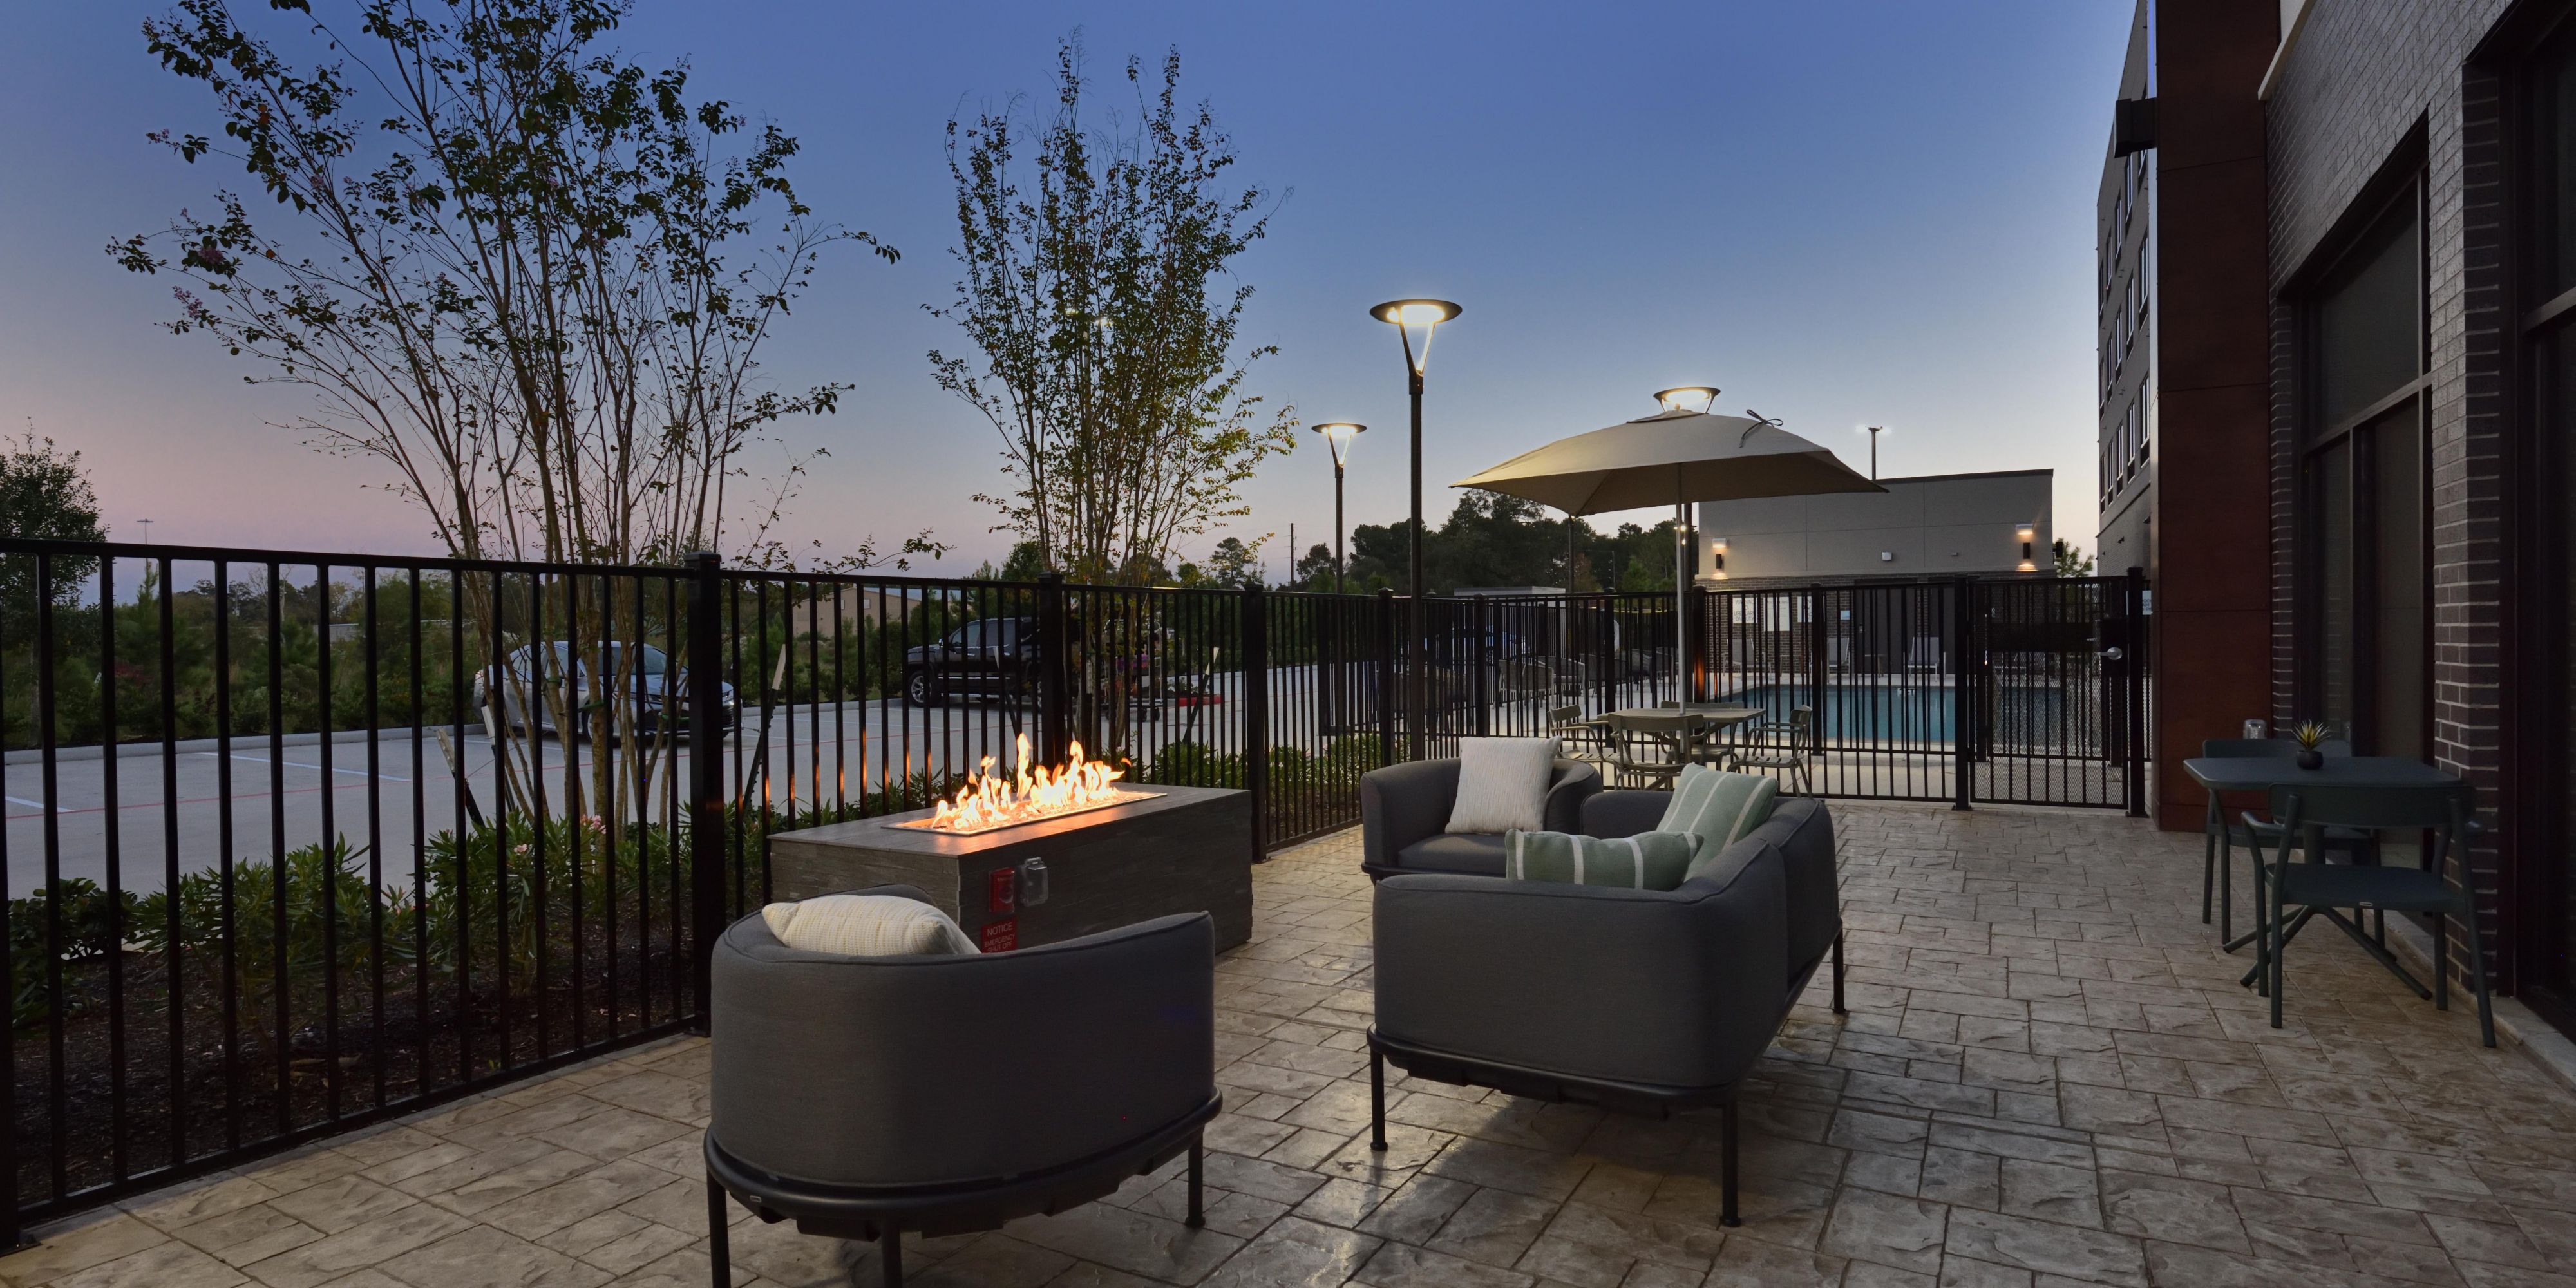 Enjoy our outdoor patio anytime during your stay. Our patio is a perfect spot to enjoy the morning sunrise and then in the evening turn on the firepit to unwind from your day. With a variety of seating options for eating, working, or relaxing we invite you outside!